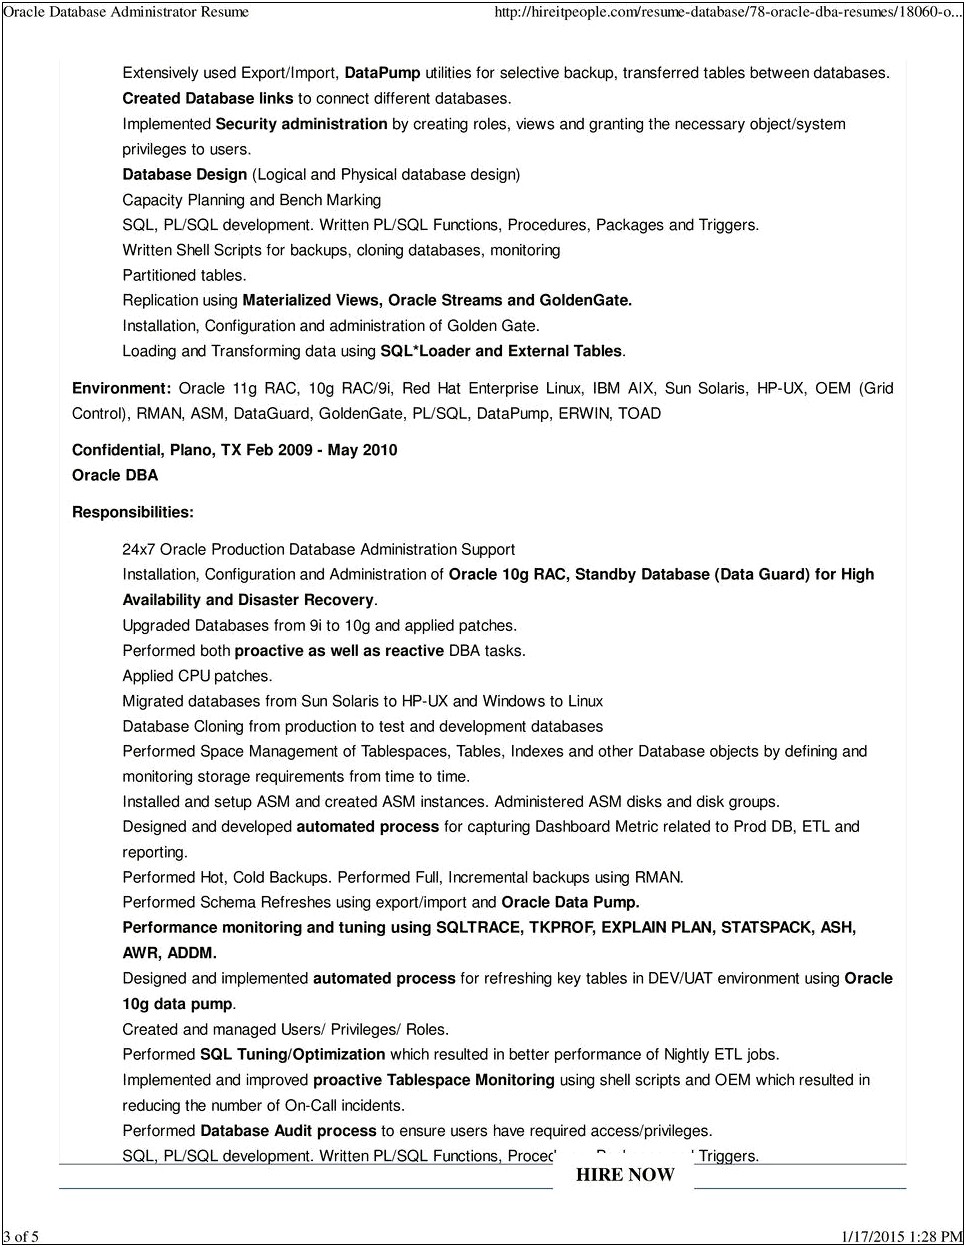 Oracle Dba Resume For 7 Years Experience Latest